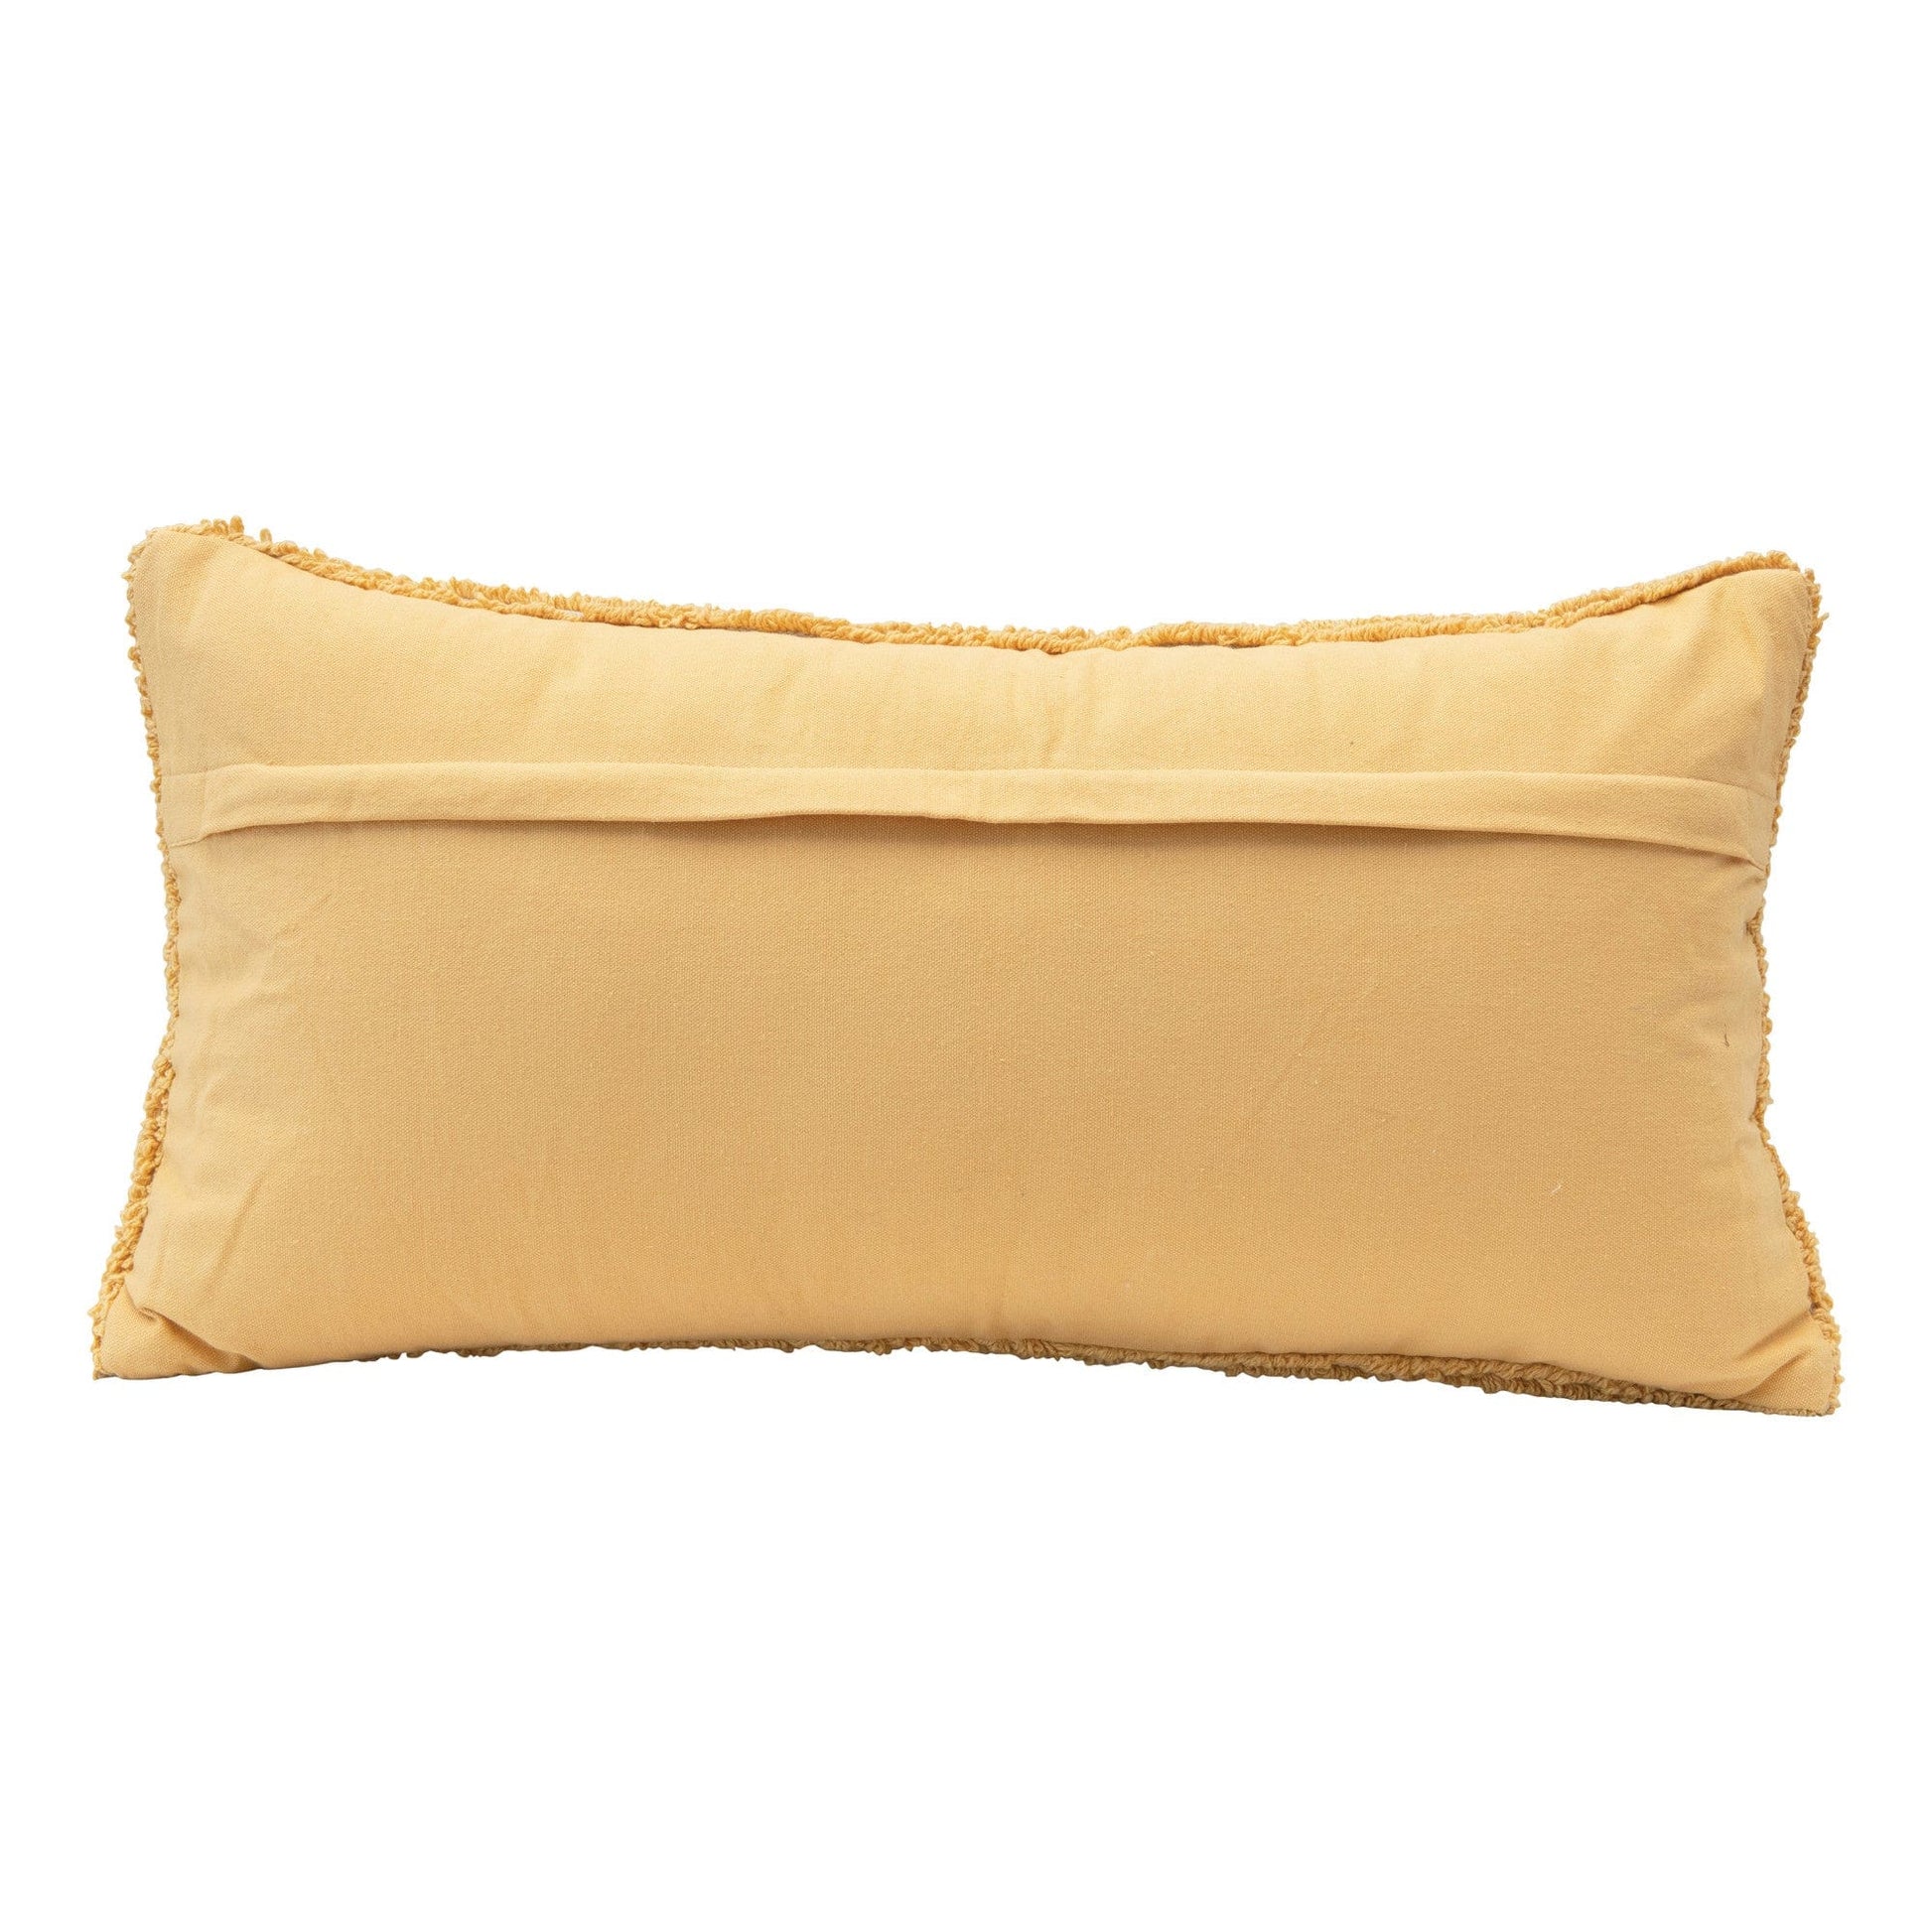 "Sunkissed" Yellow & White Cotton Punch Hook Lumbar Pillow  - Five and Divine